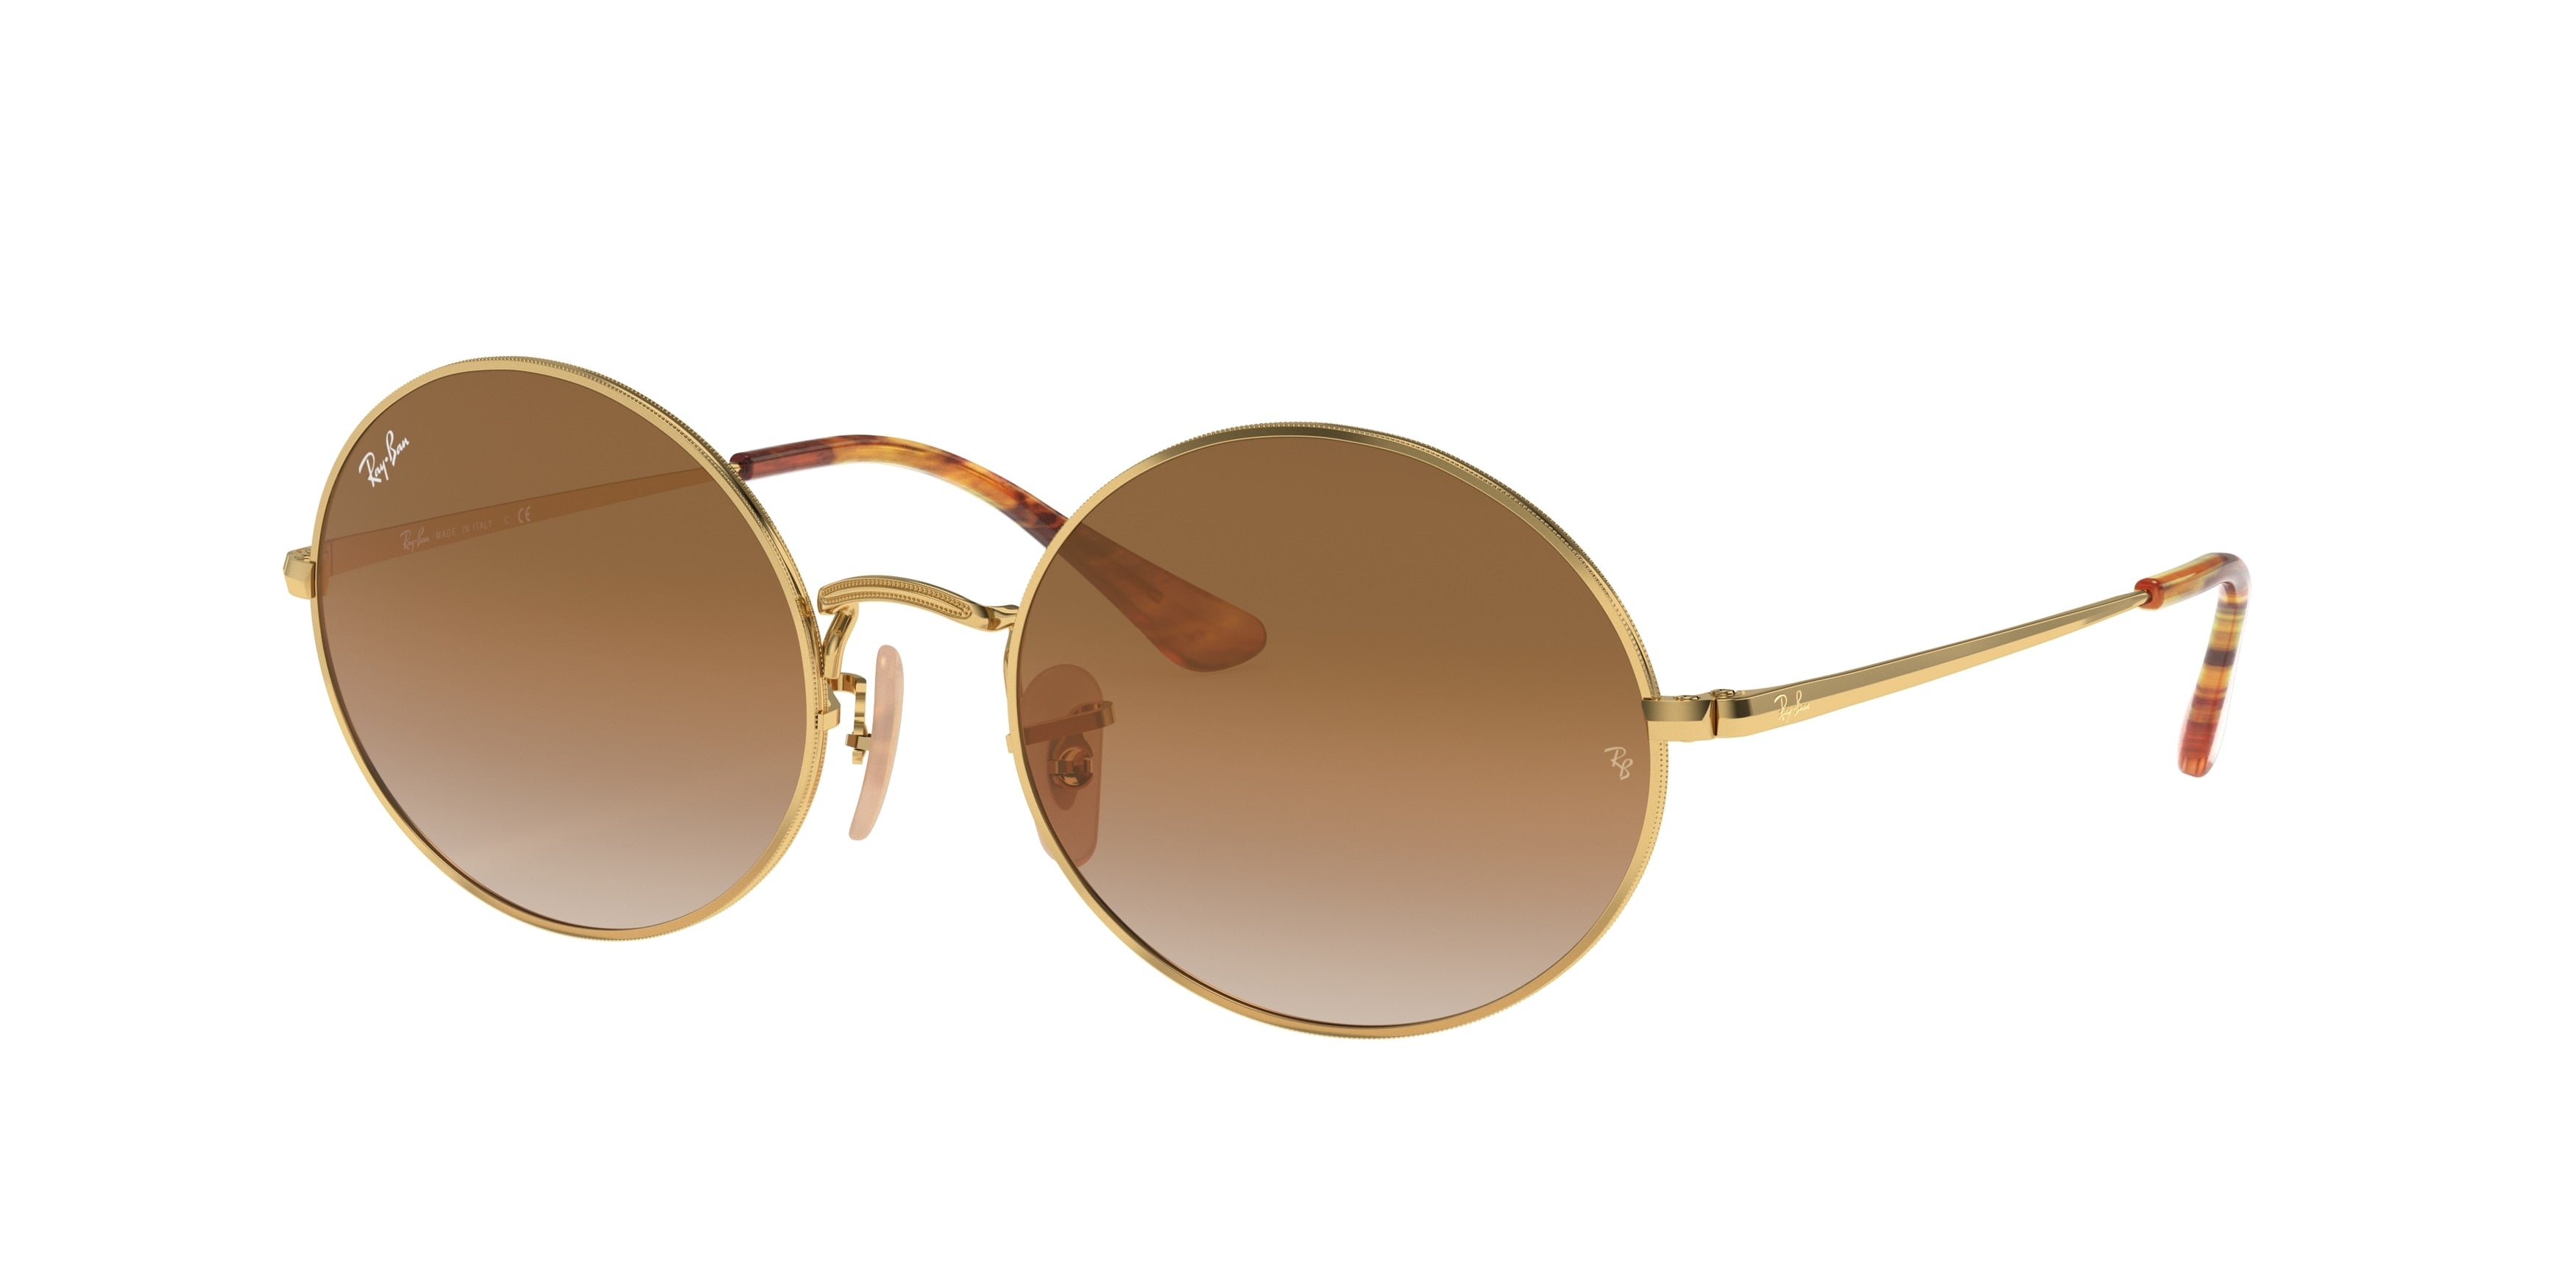 Ray-Ban OVAL RB1970 Oval Sunglasses  914751-Gold 53-145-19 - Color Map Gold